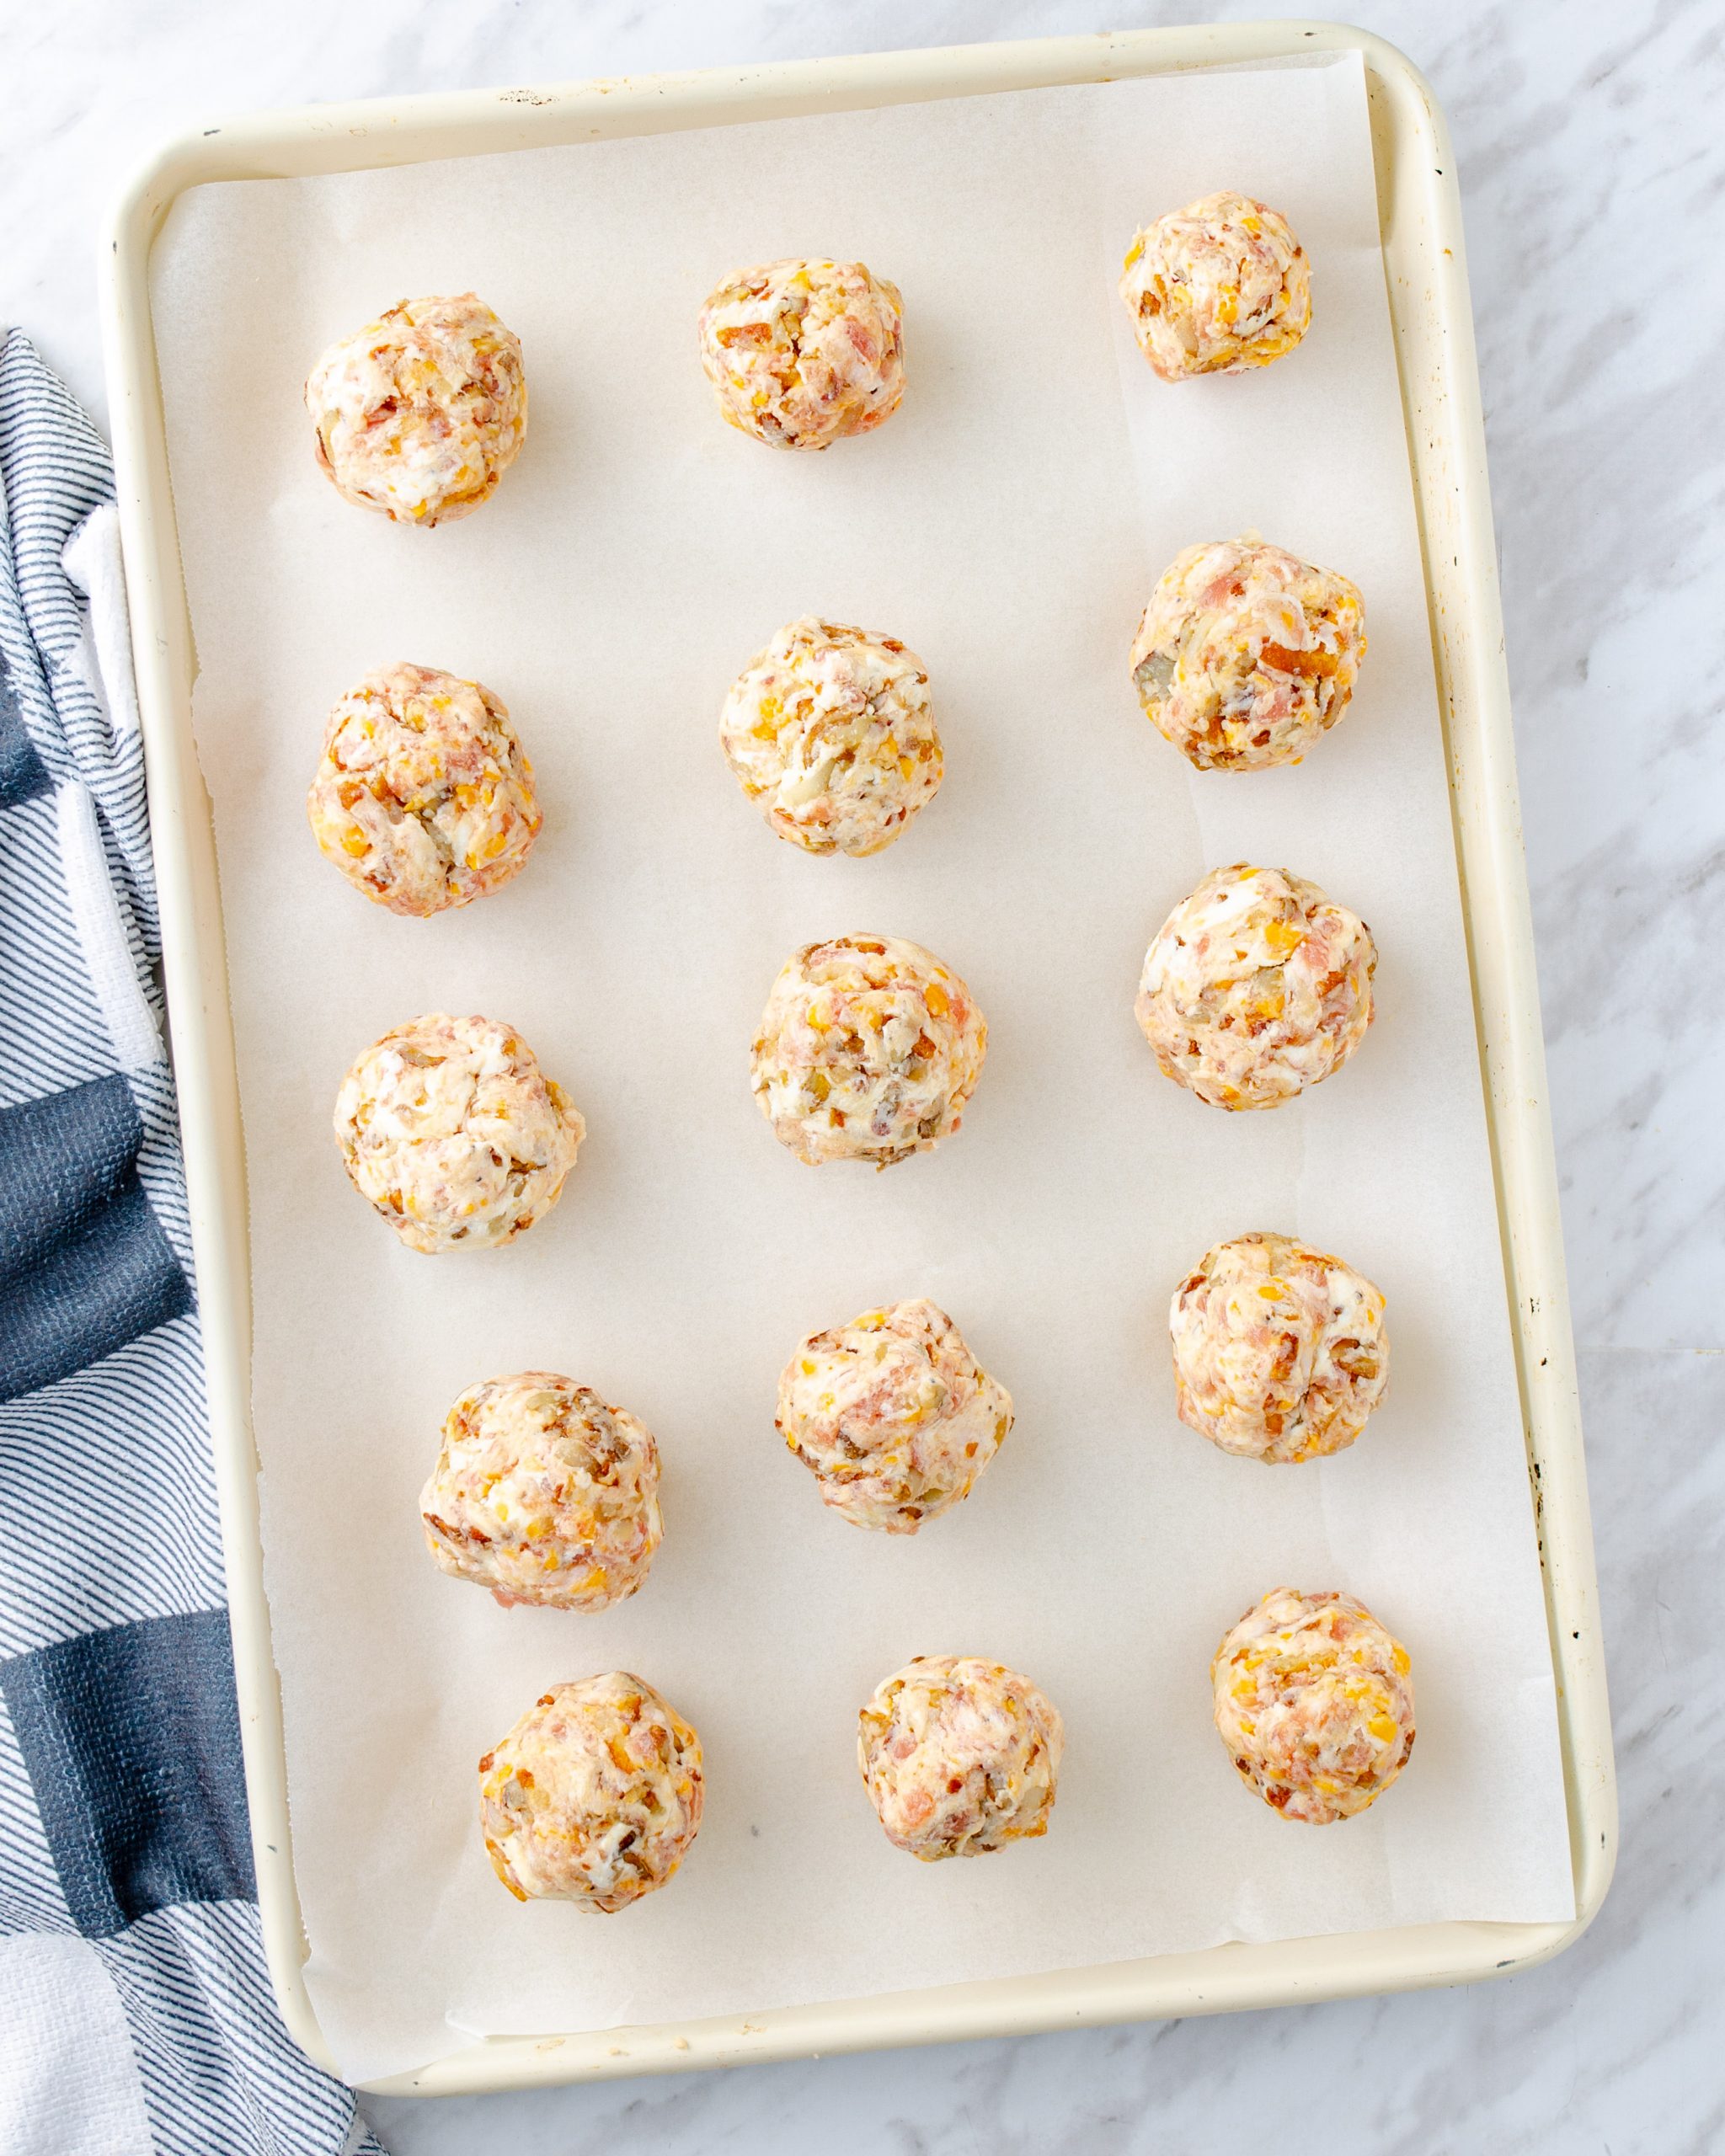 Form the mixture into 2-inch balls, and place them on the lined baking sheet. 